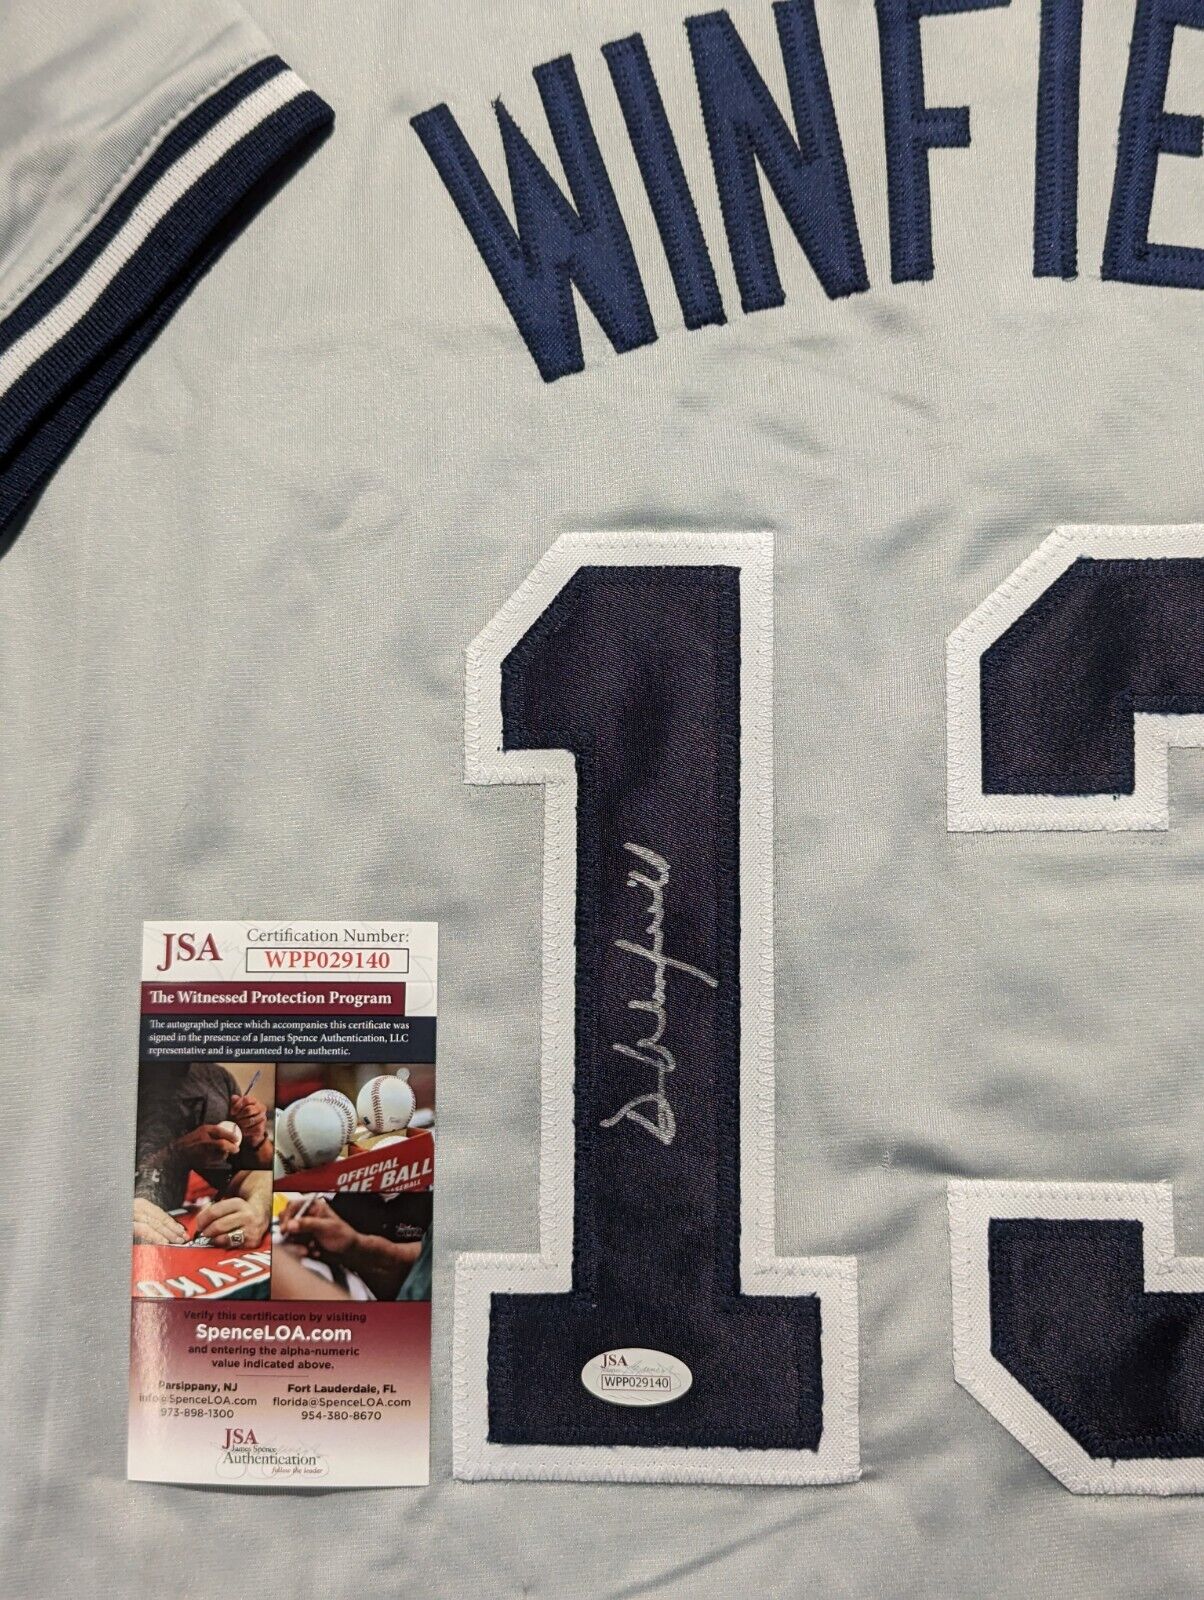 N.Y. Yankees Style Dave Winfield Autographed Signed Custom Jersey Jsa Coa